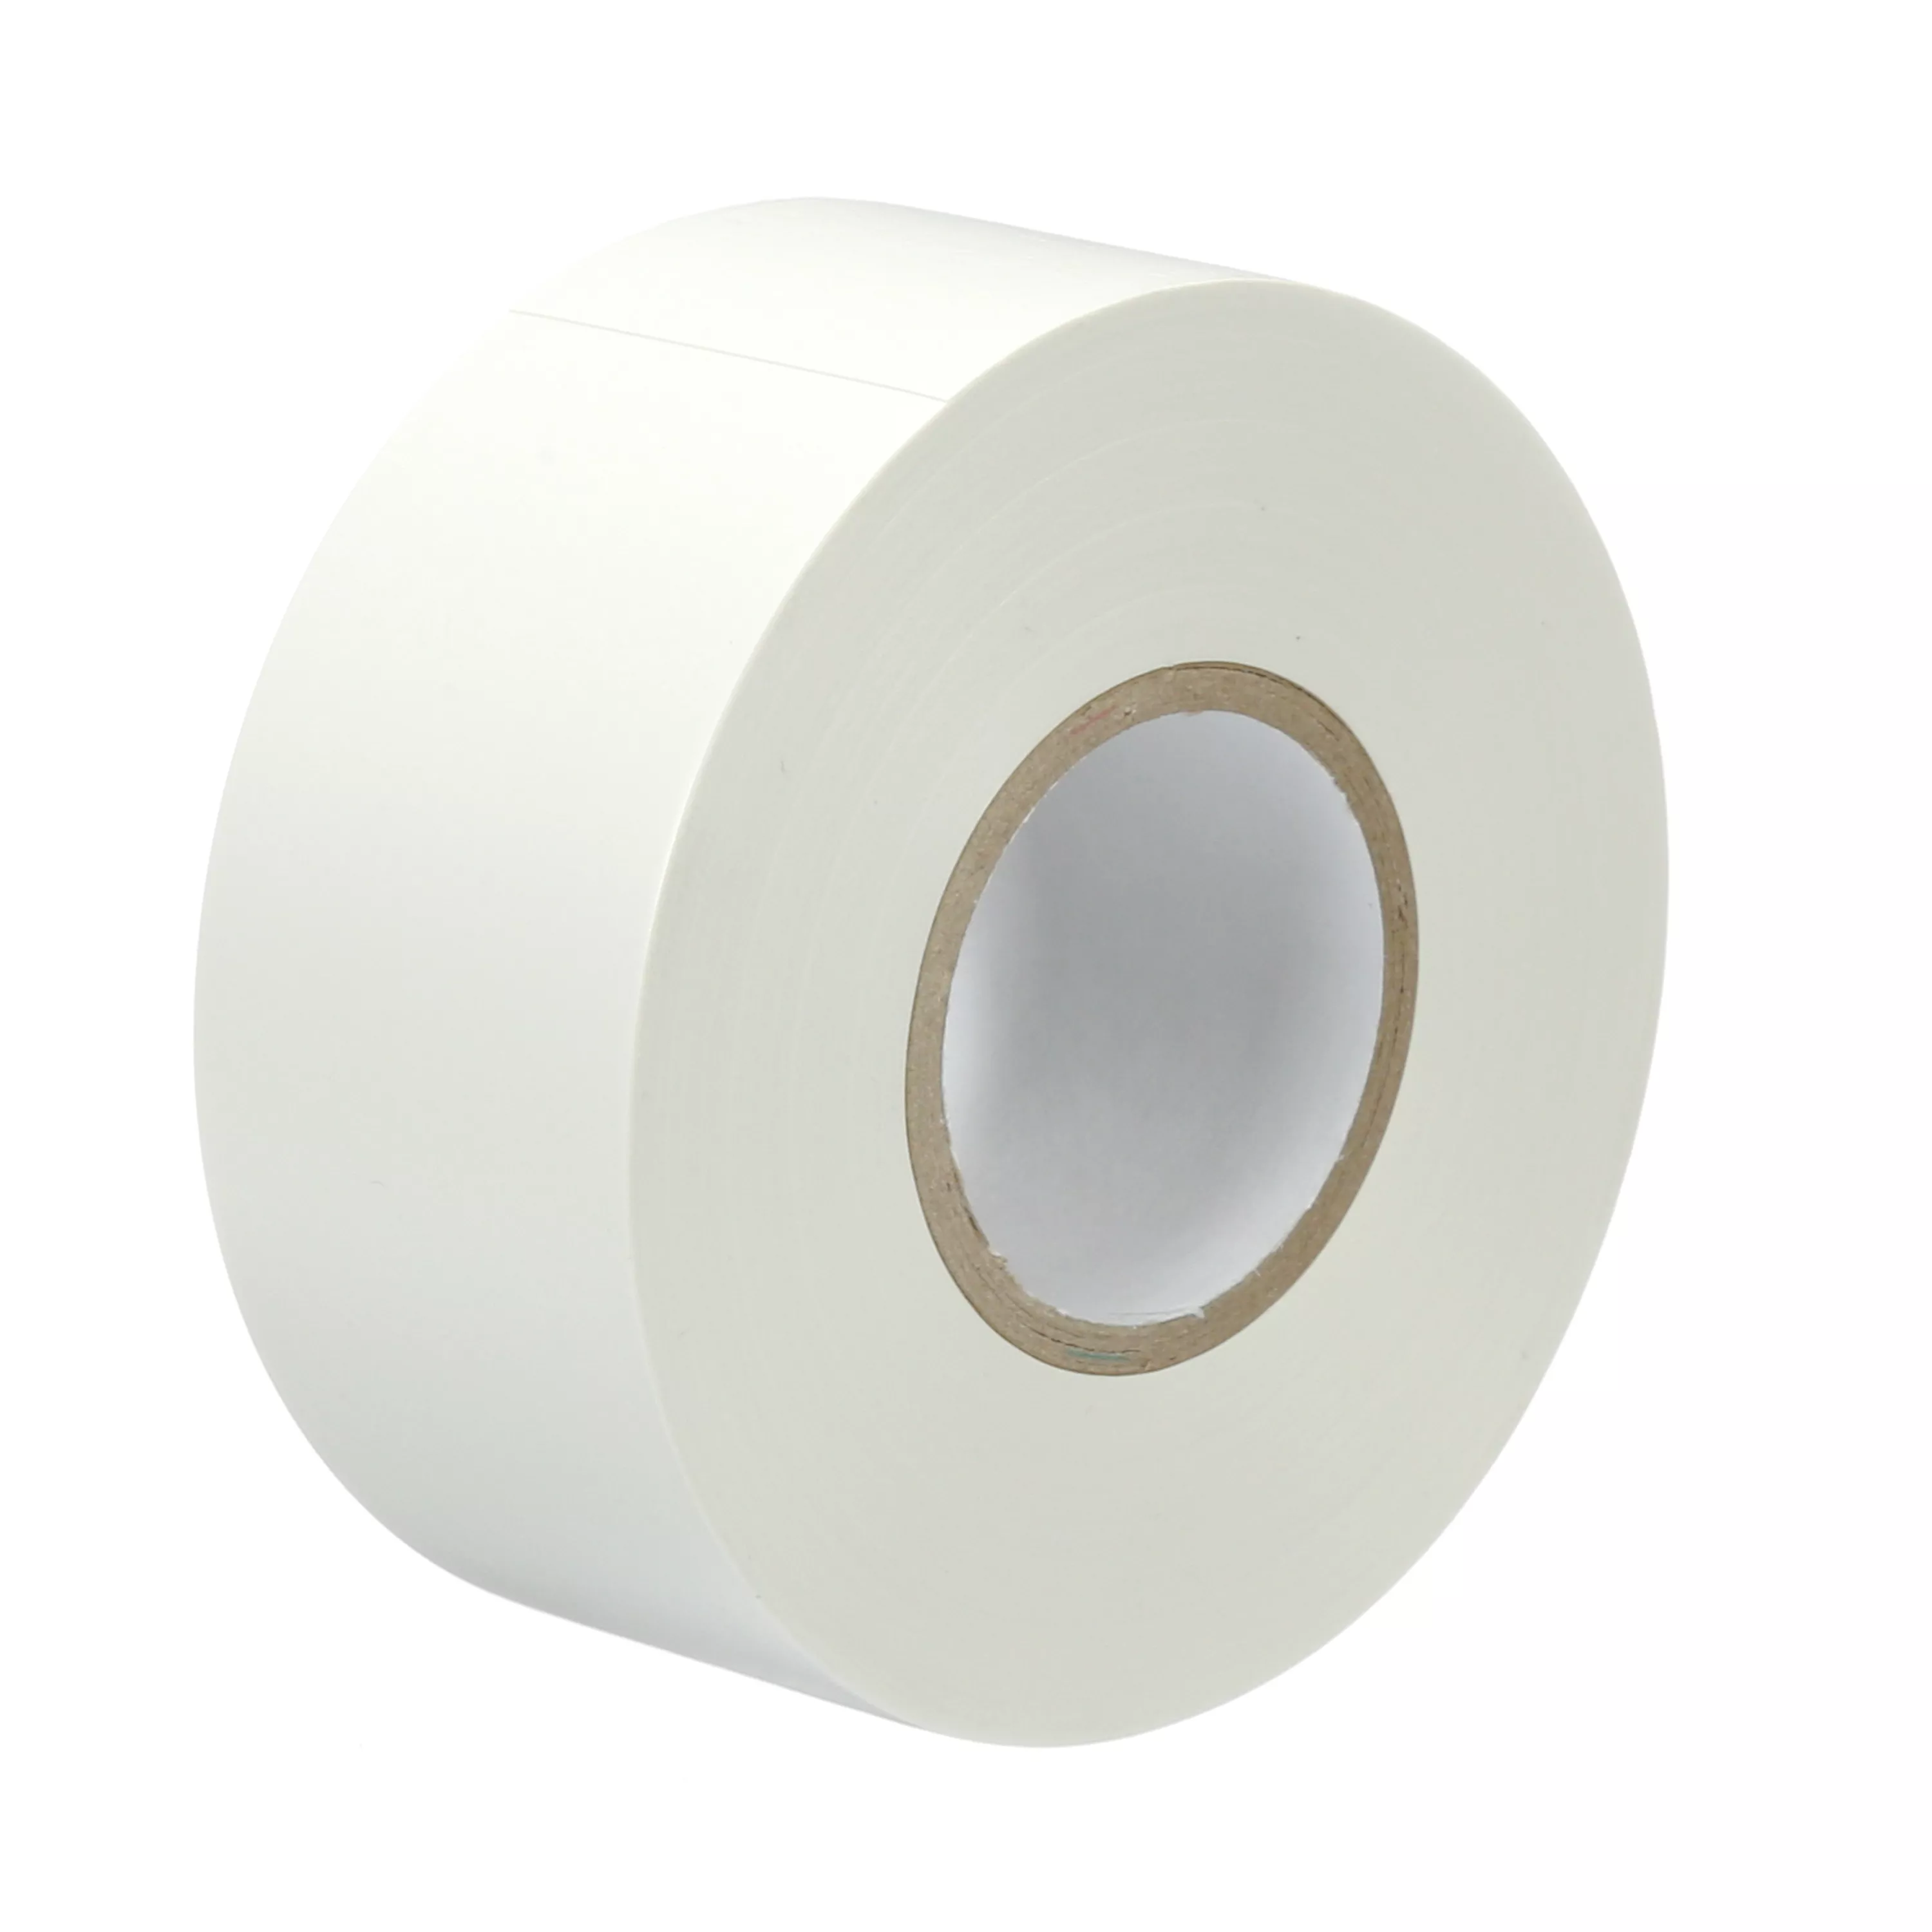 3M™ Selfwound PVC Tape 1506R, White , 1 1/2 in x 36 yd, 6 mil, 24
Rolls/Case